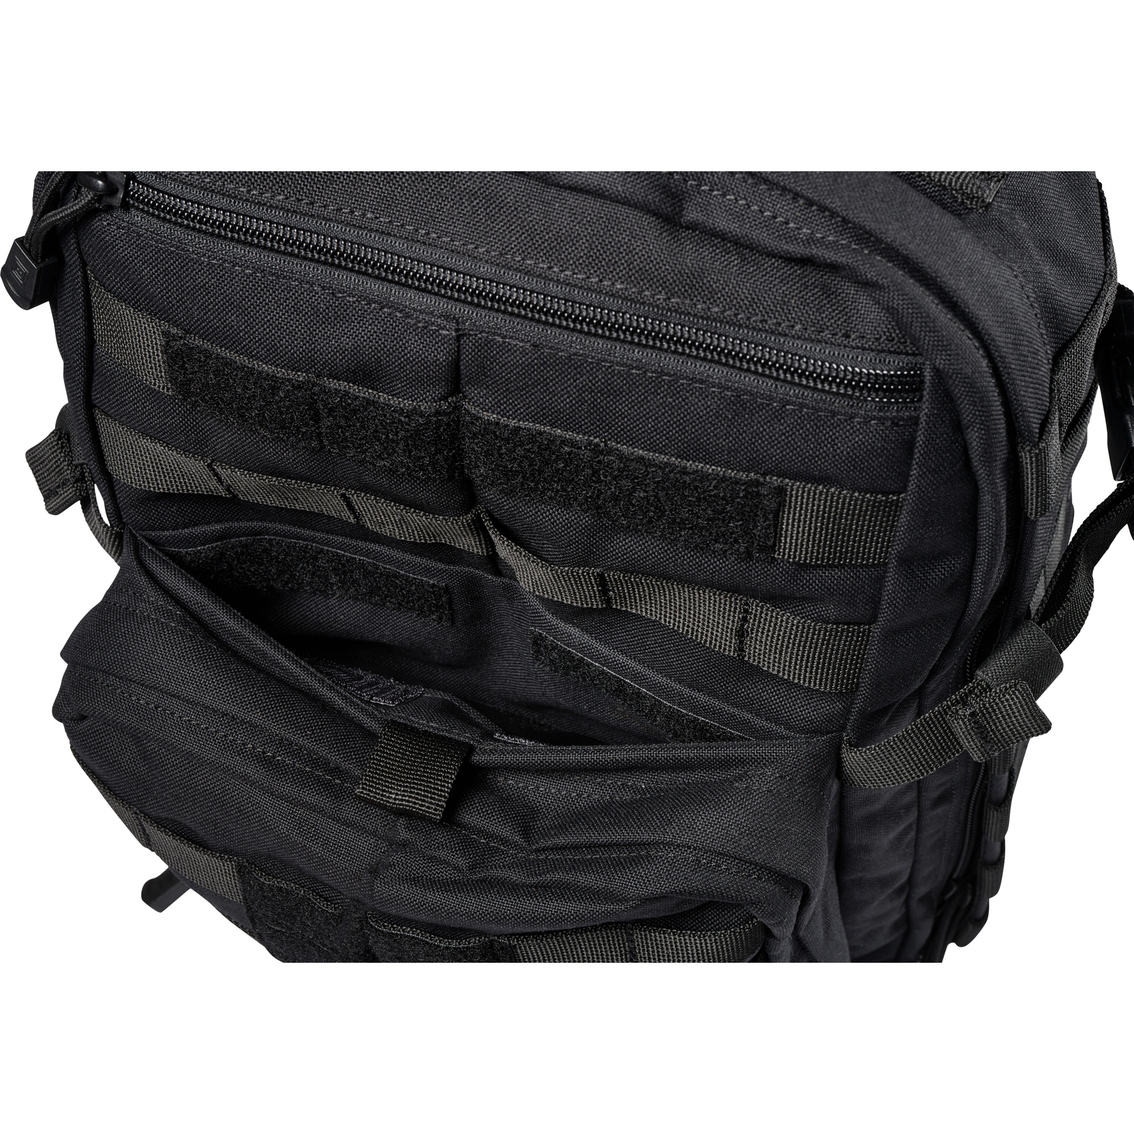 5.11 RUSH 12 2.0 Backpack - Image 10 of 10